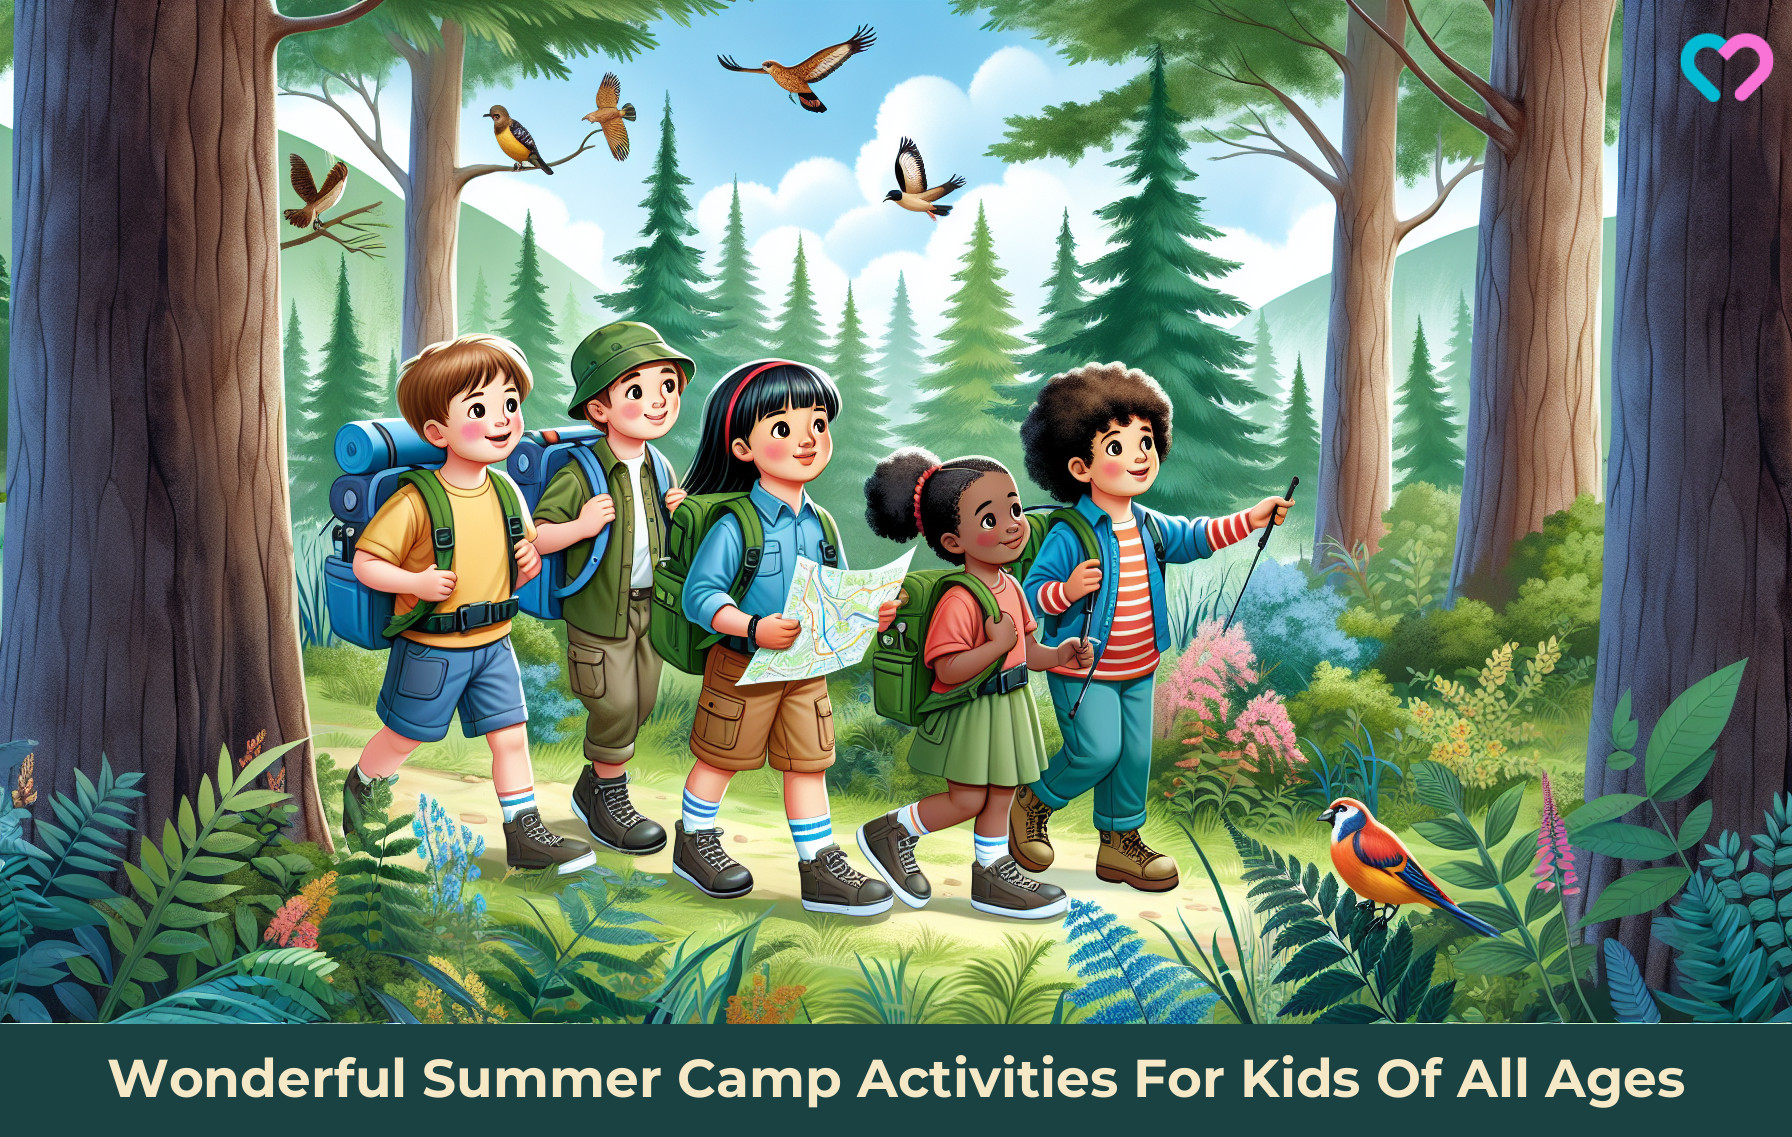 Summer Camp Activities For Kids_illustration